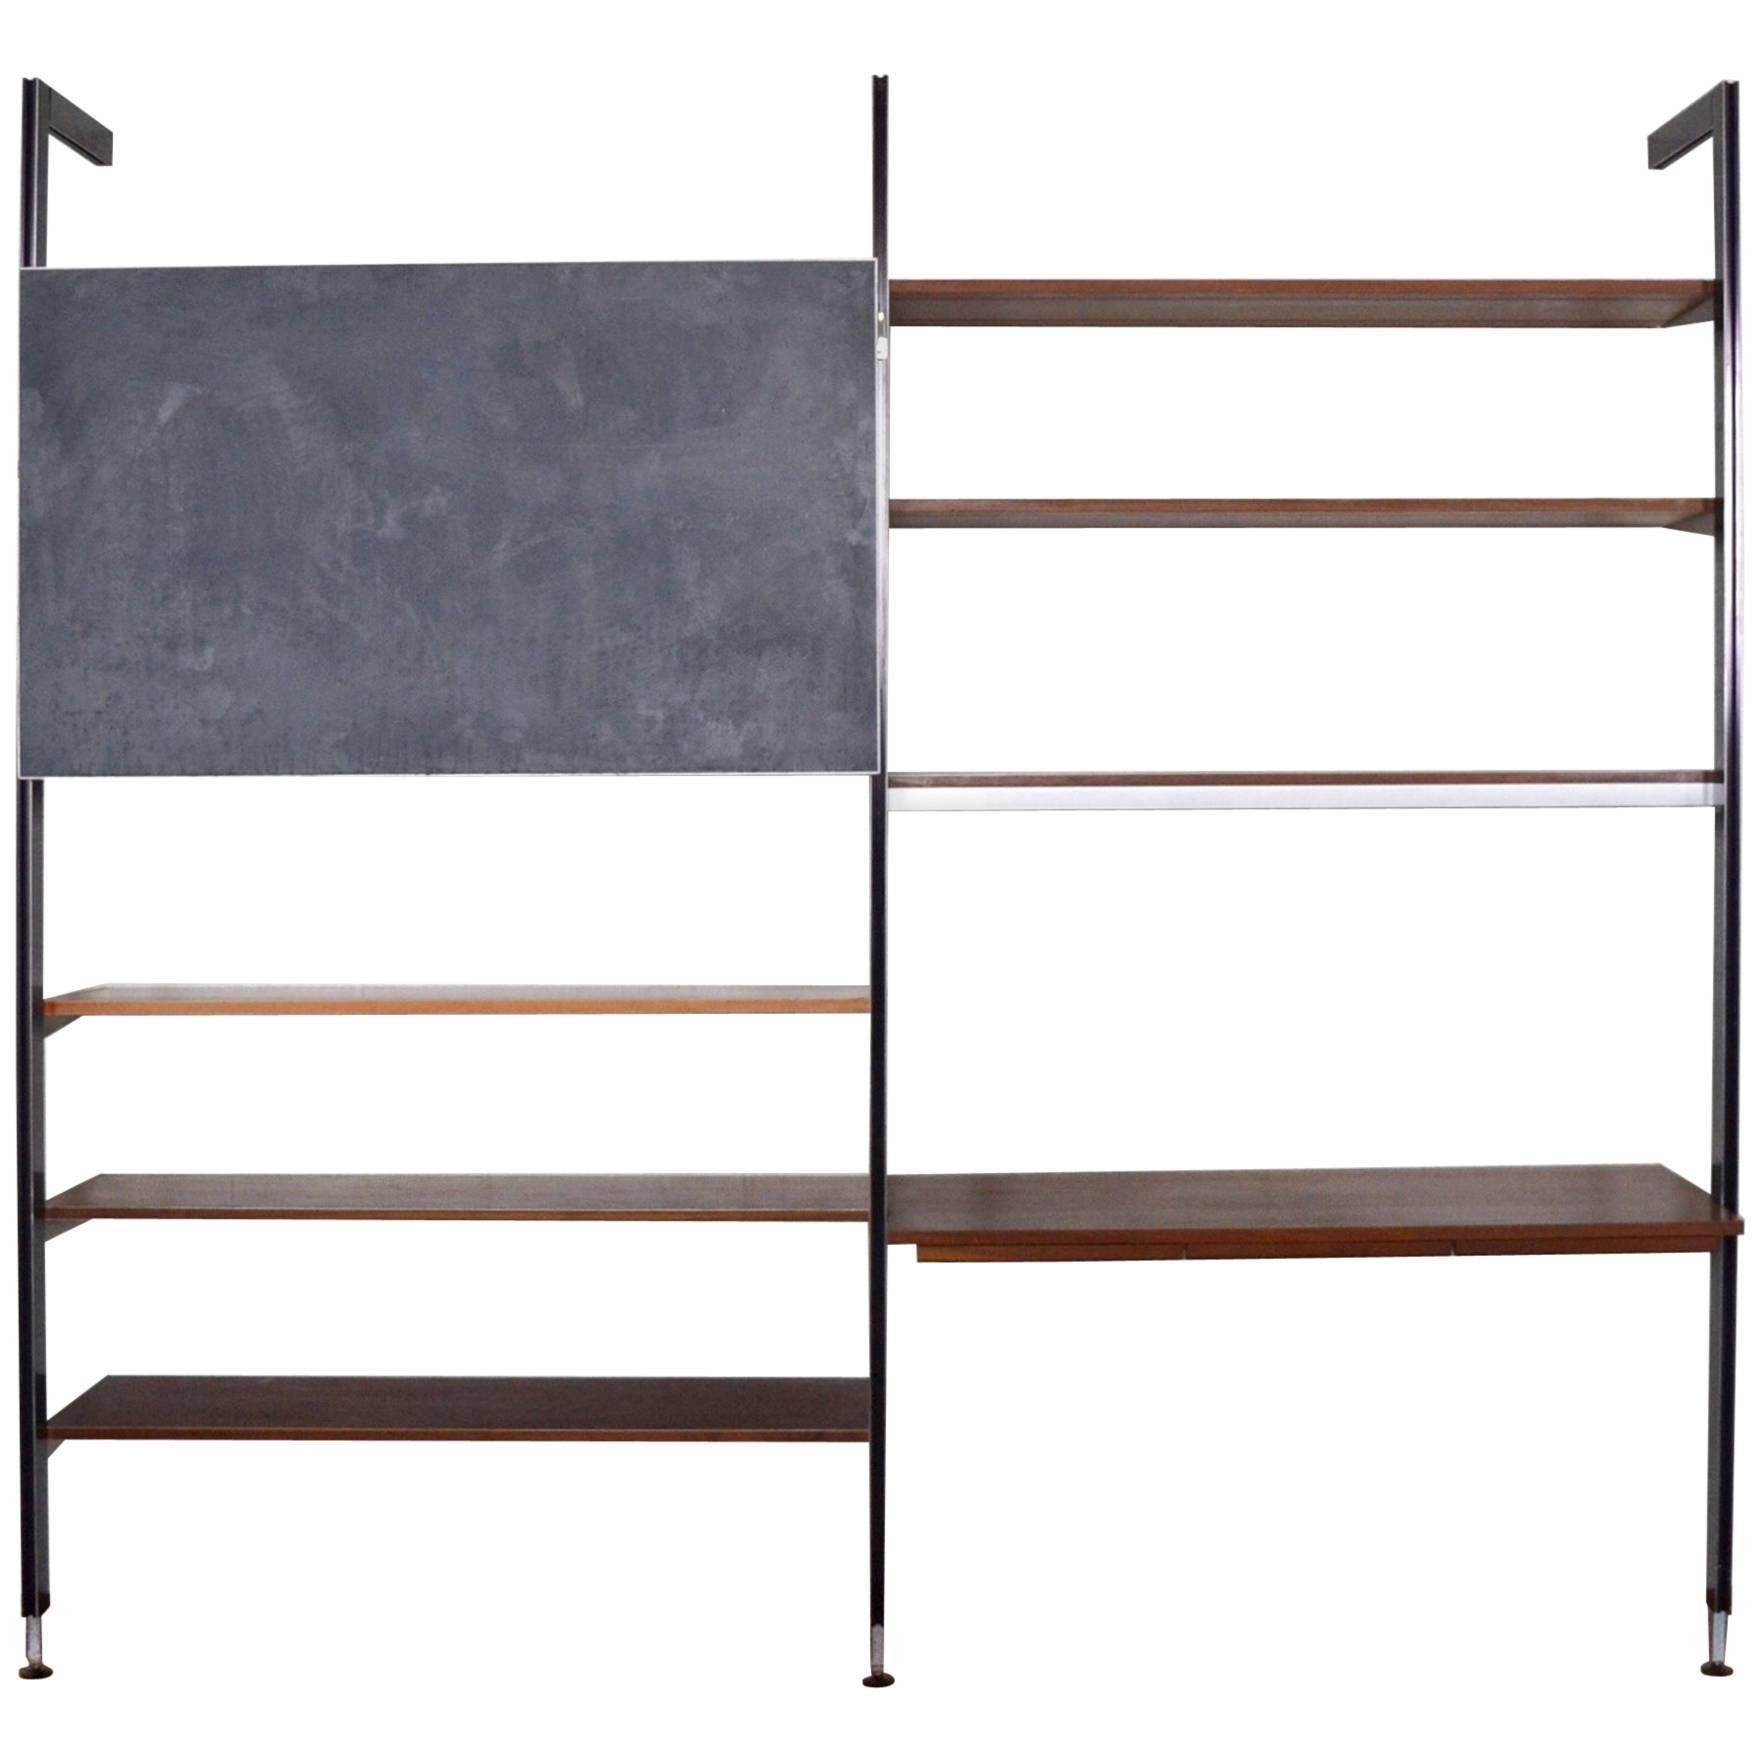 George Nelson CSS Shelving Unit with Chalkboard by Herman Miller